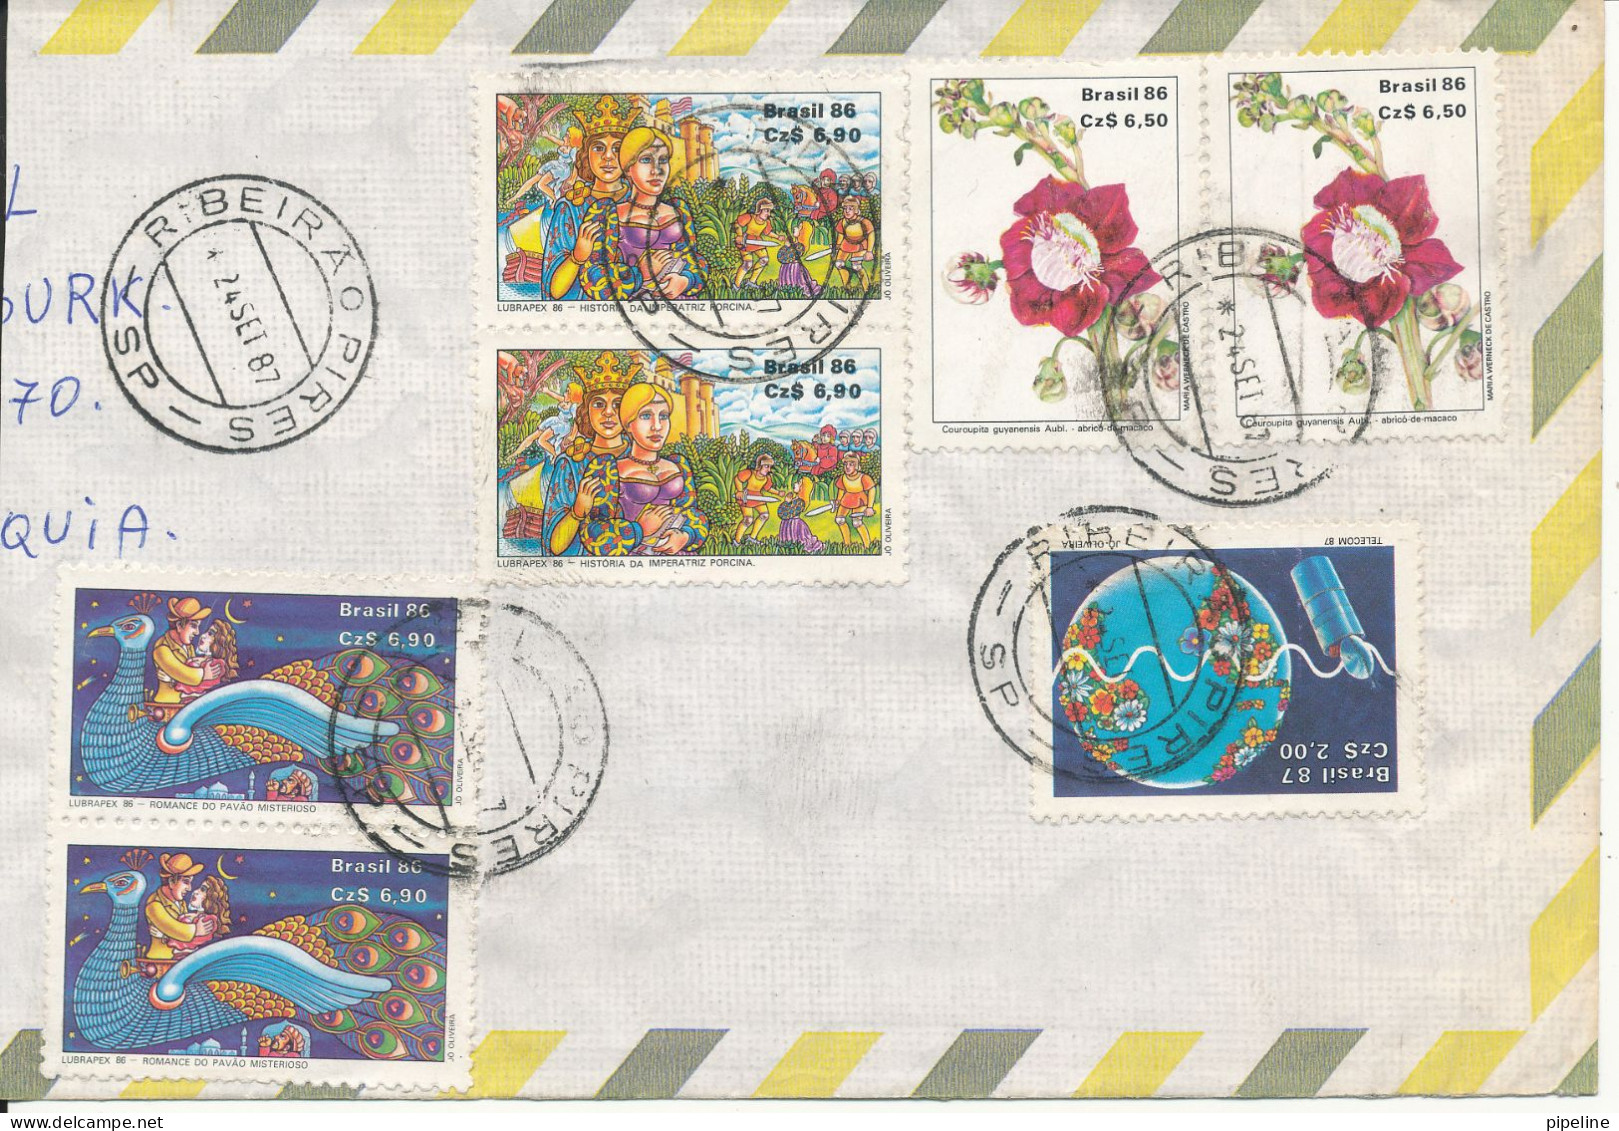 Brazil Air Mail Cover Sent To Czechoslovakia 24-9-1987 With A Lot Of Stamps (the Cover Is Cut In The Left Side) - Luchtpost